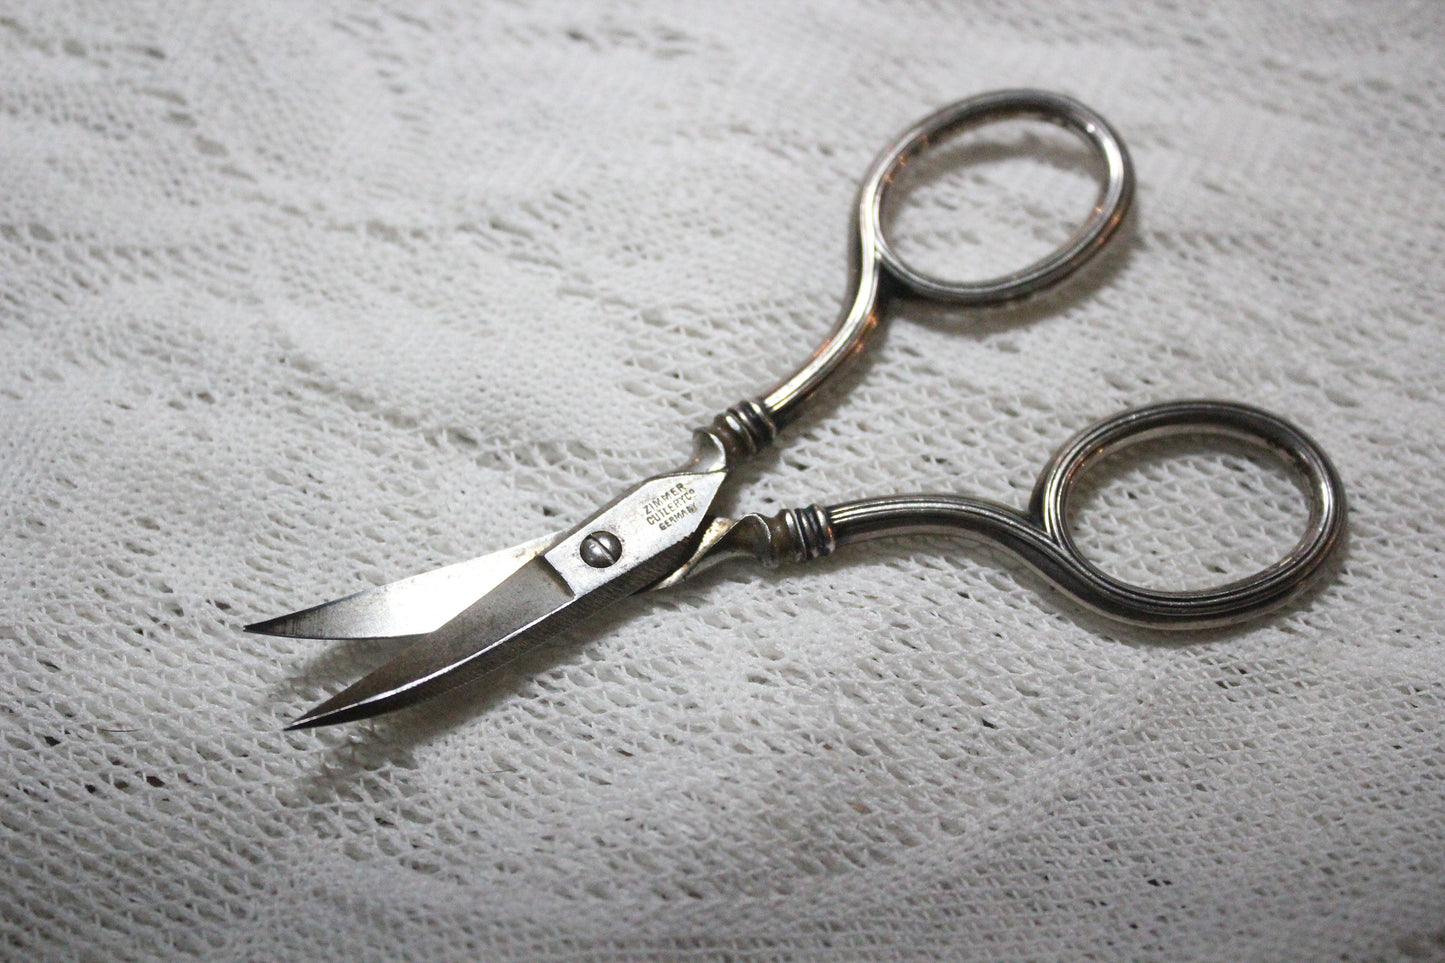 Appliqué Scissors with Sterling Silver Handles